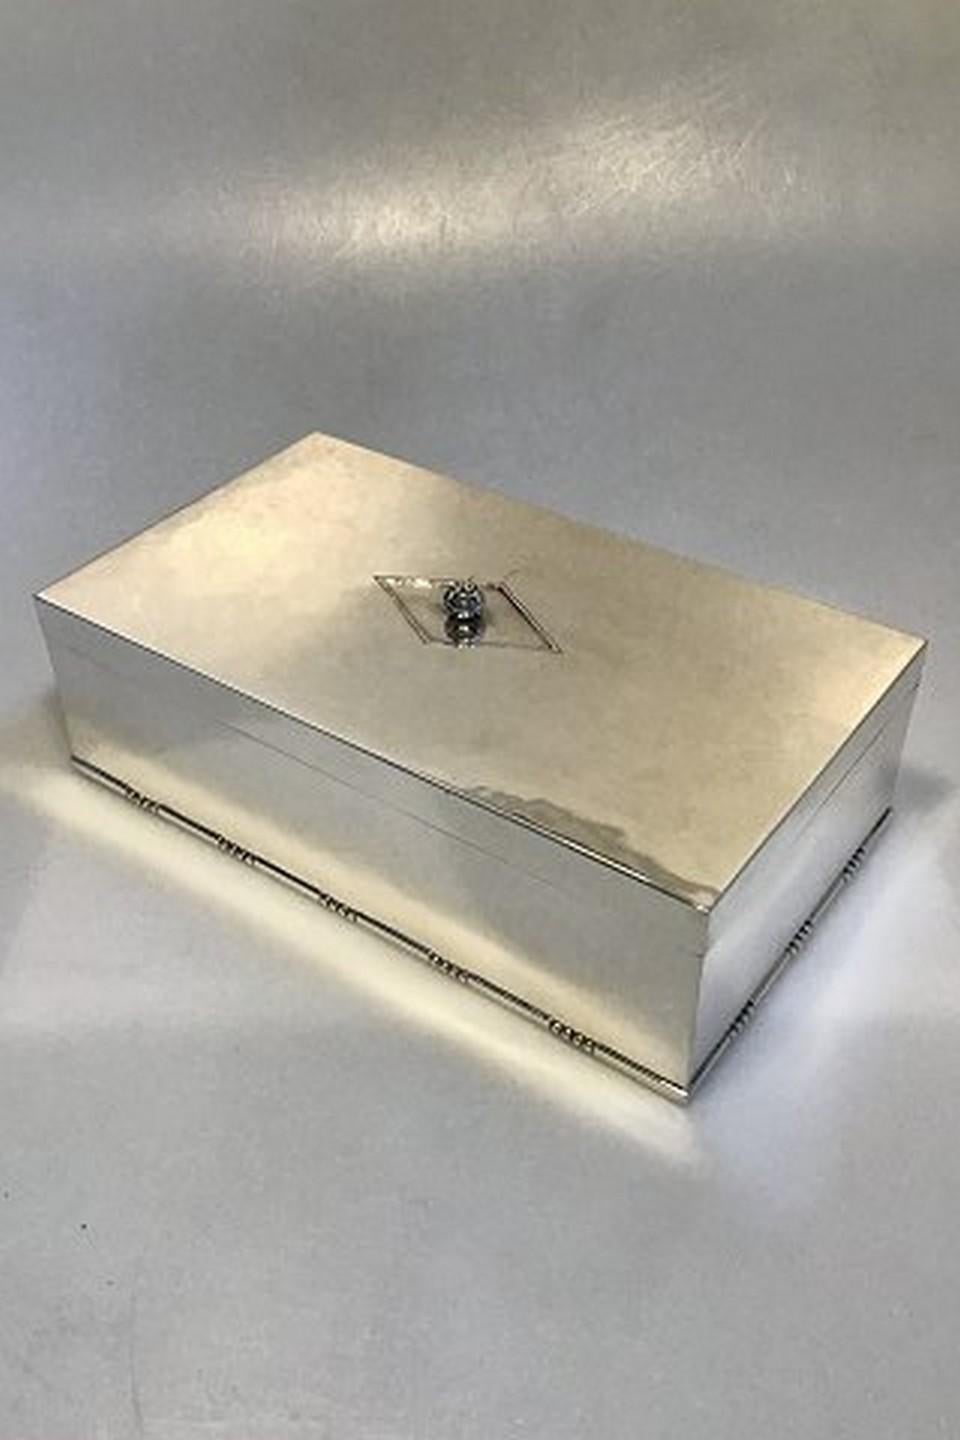 Georg Jensen sterling silver cigar box/humidor No 329A wodden lining
Measures: 22.5 cm / 8 55/64 in. x 13 cm / 5 1/8 in. x 7 cm / 2 3/4 in.
Weight 1130 gr/39.85 oz
Item no.: 377623.